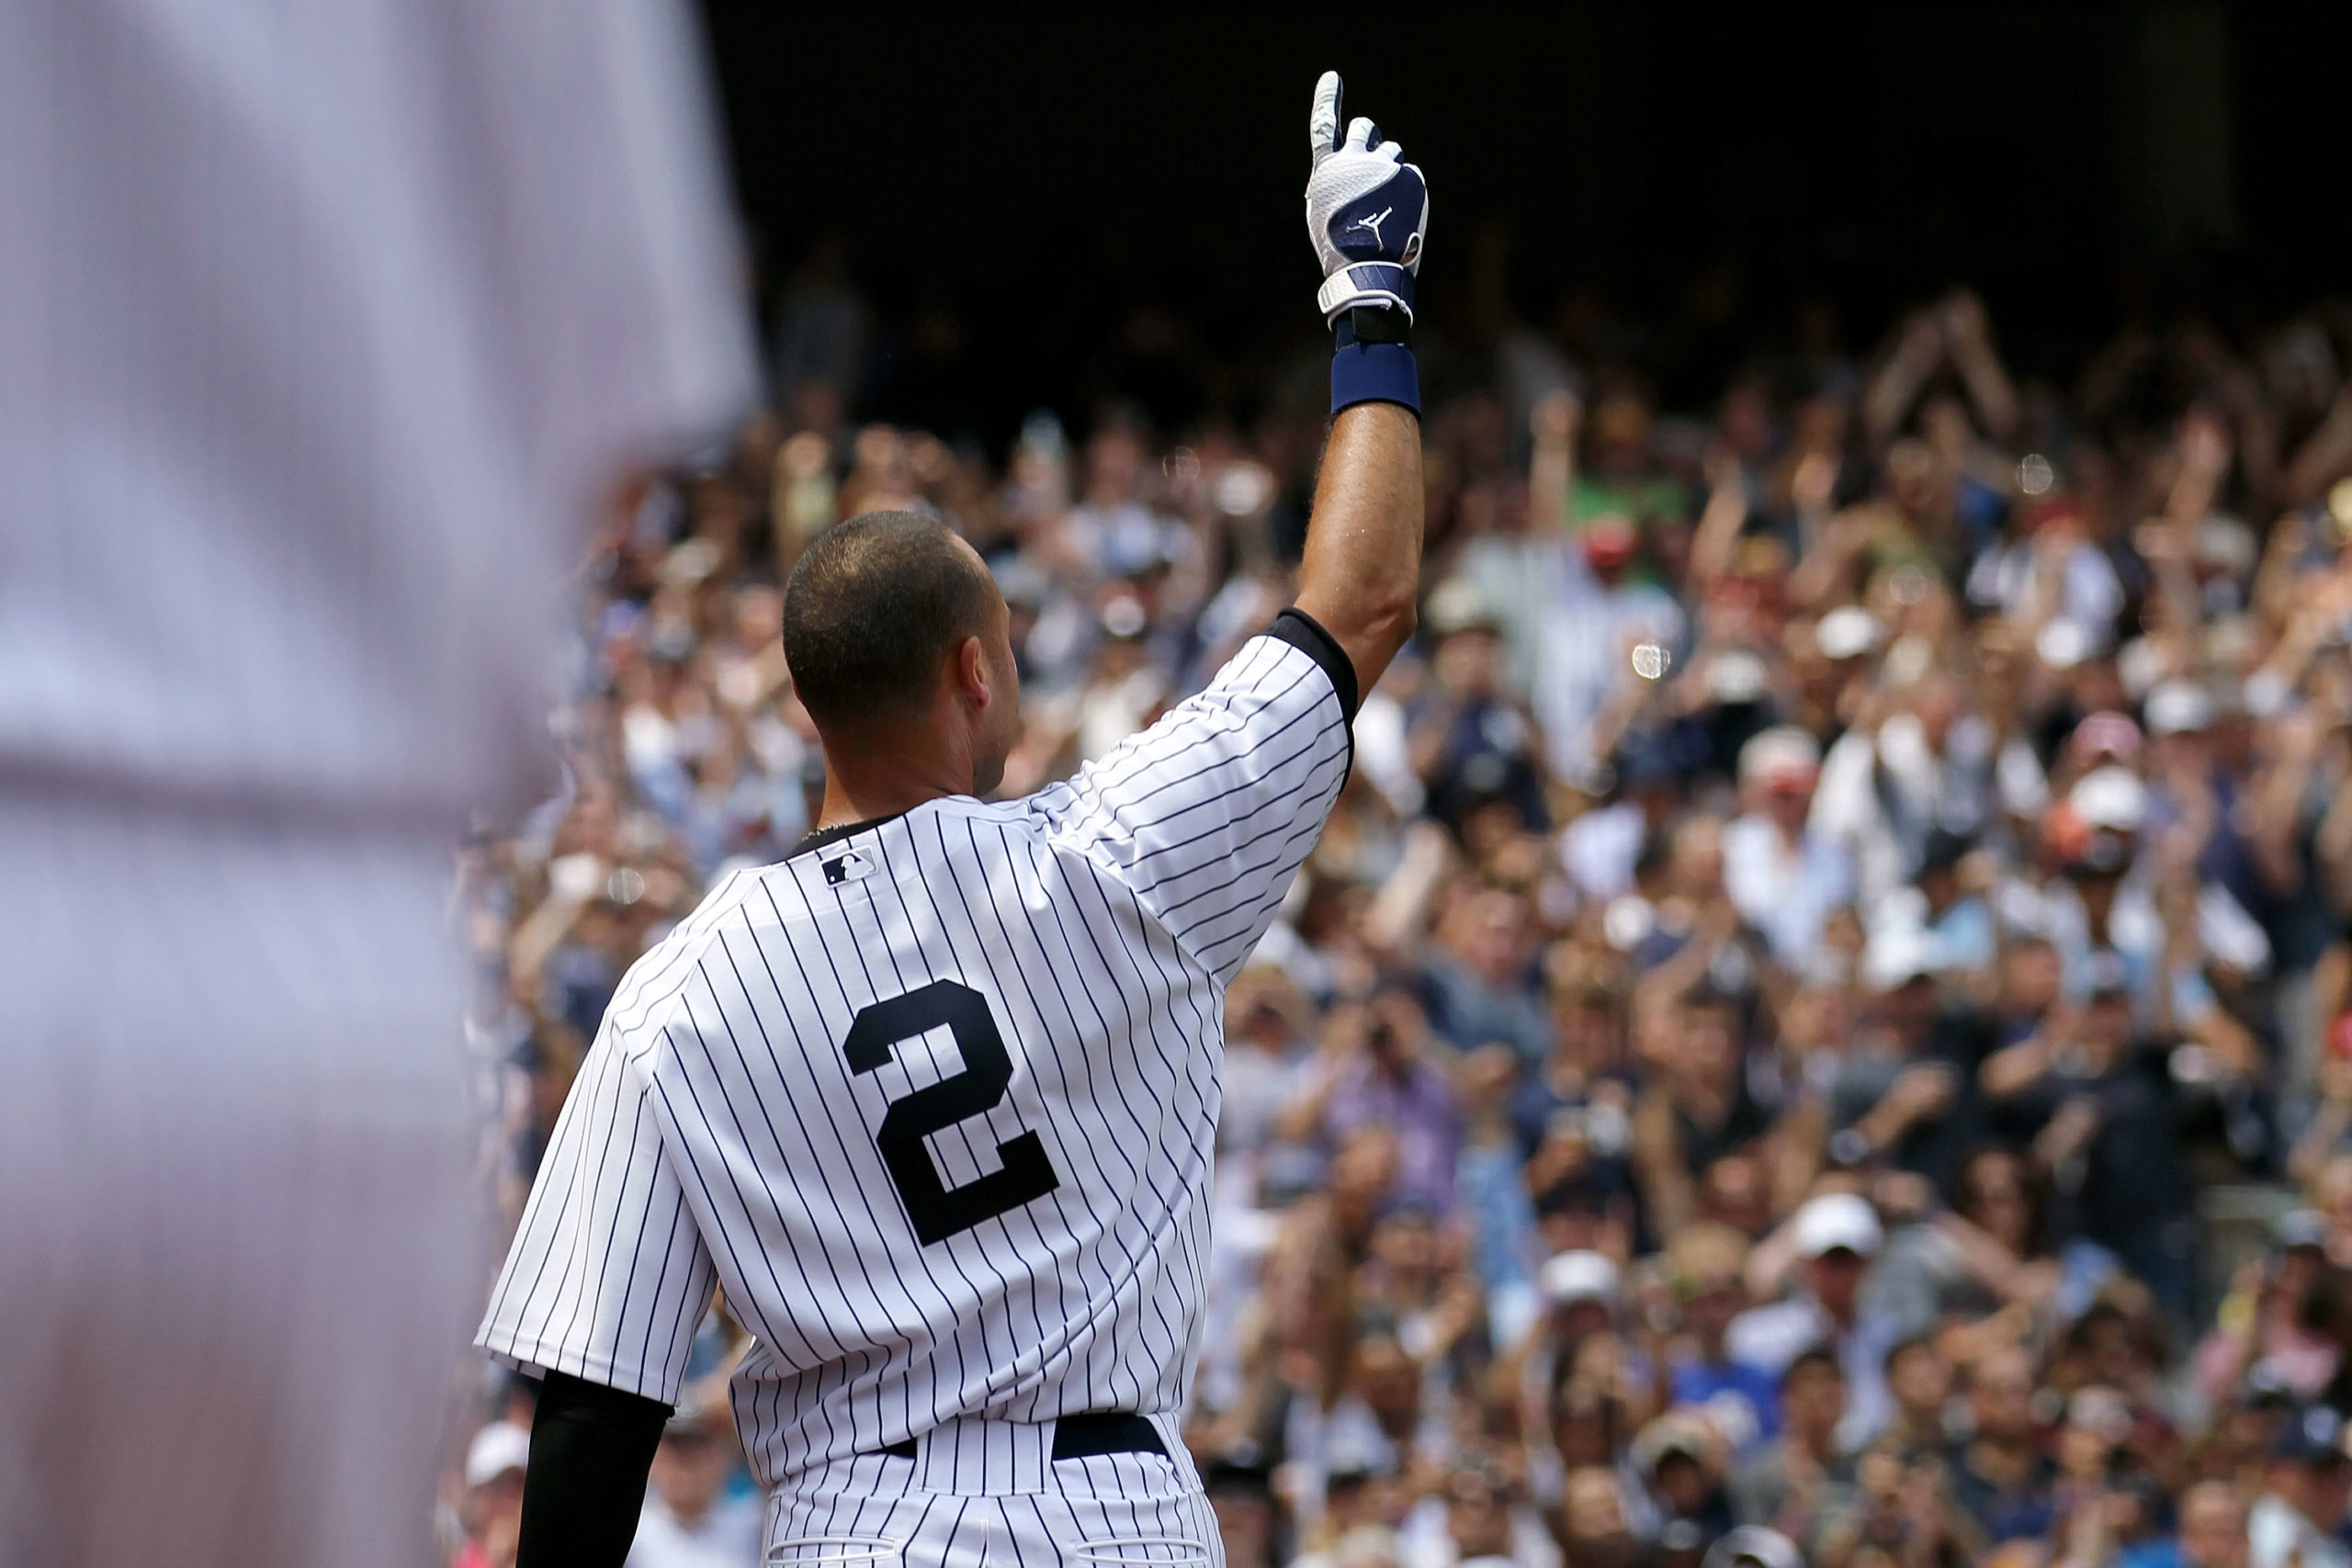 NEW YORK, NY - JULY 09:  Derek Jeter #2 of the New York Yankees waves to the fans after hitting a solo home run in the third inning for career hit 3000 while playing against the Tampa Bay Rays at Yankee Stadium on July 9, 2011 in the Bronx borough of New York City.  (Photo by Nick Laham/Getty Images)